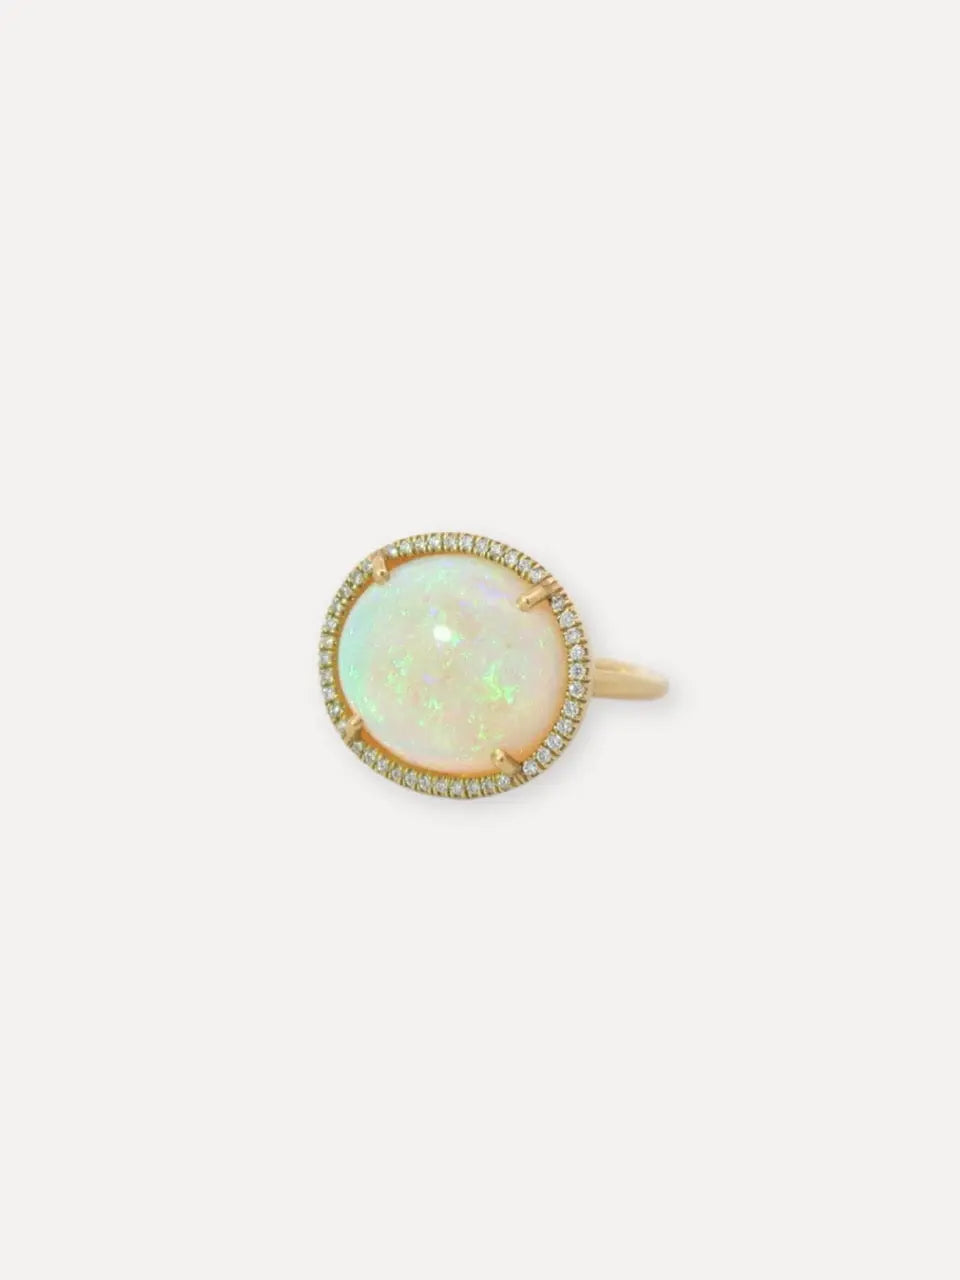 Irene Neuwirth One-of-a-kind opal and diamond ring Irene Neuwirth One-of-a-kind opal and diamond ring Irene Neuwirth Irene Neuwirth  Squash Blossom Vail